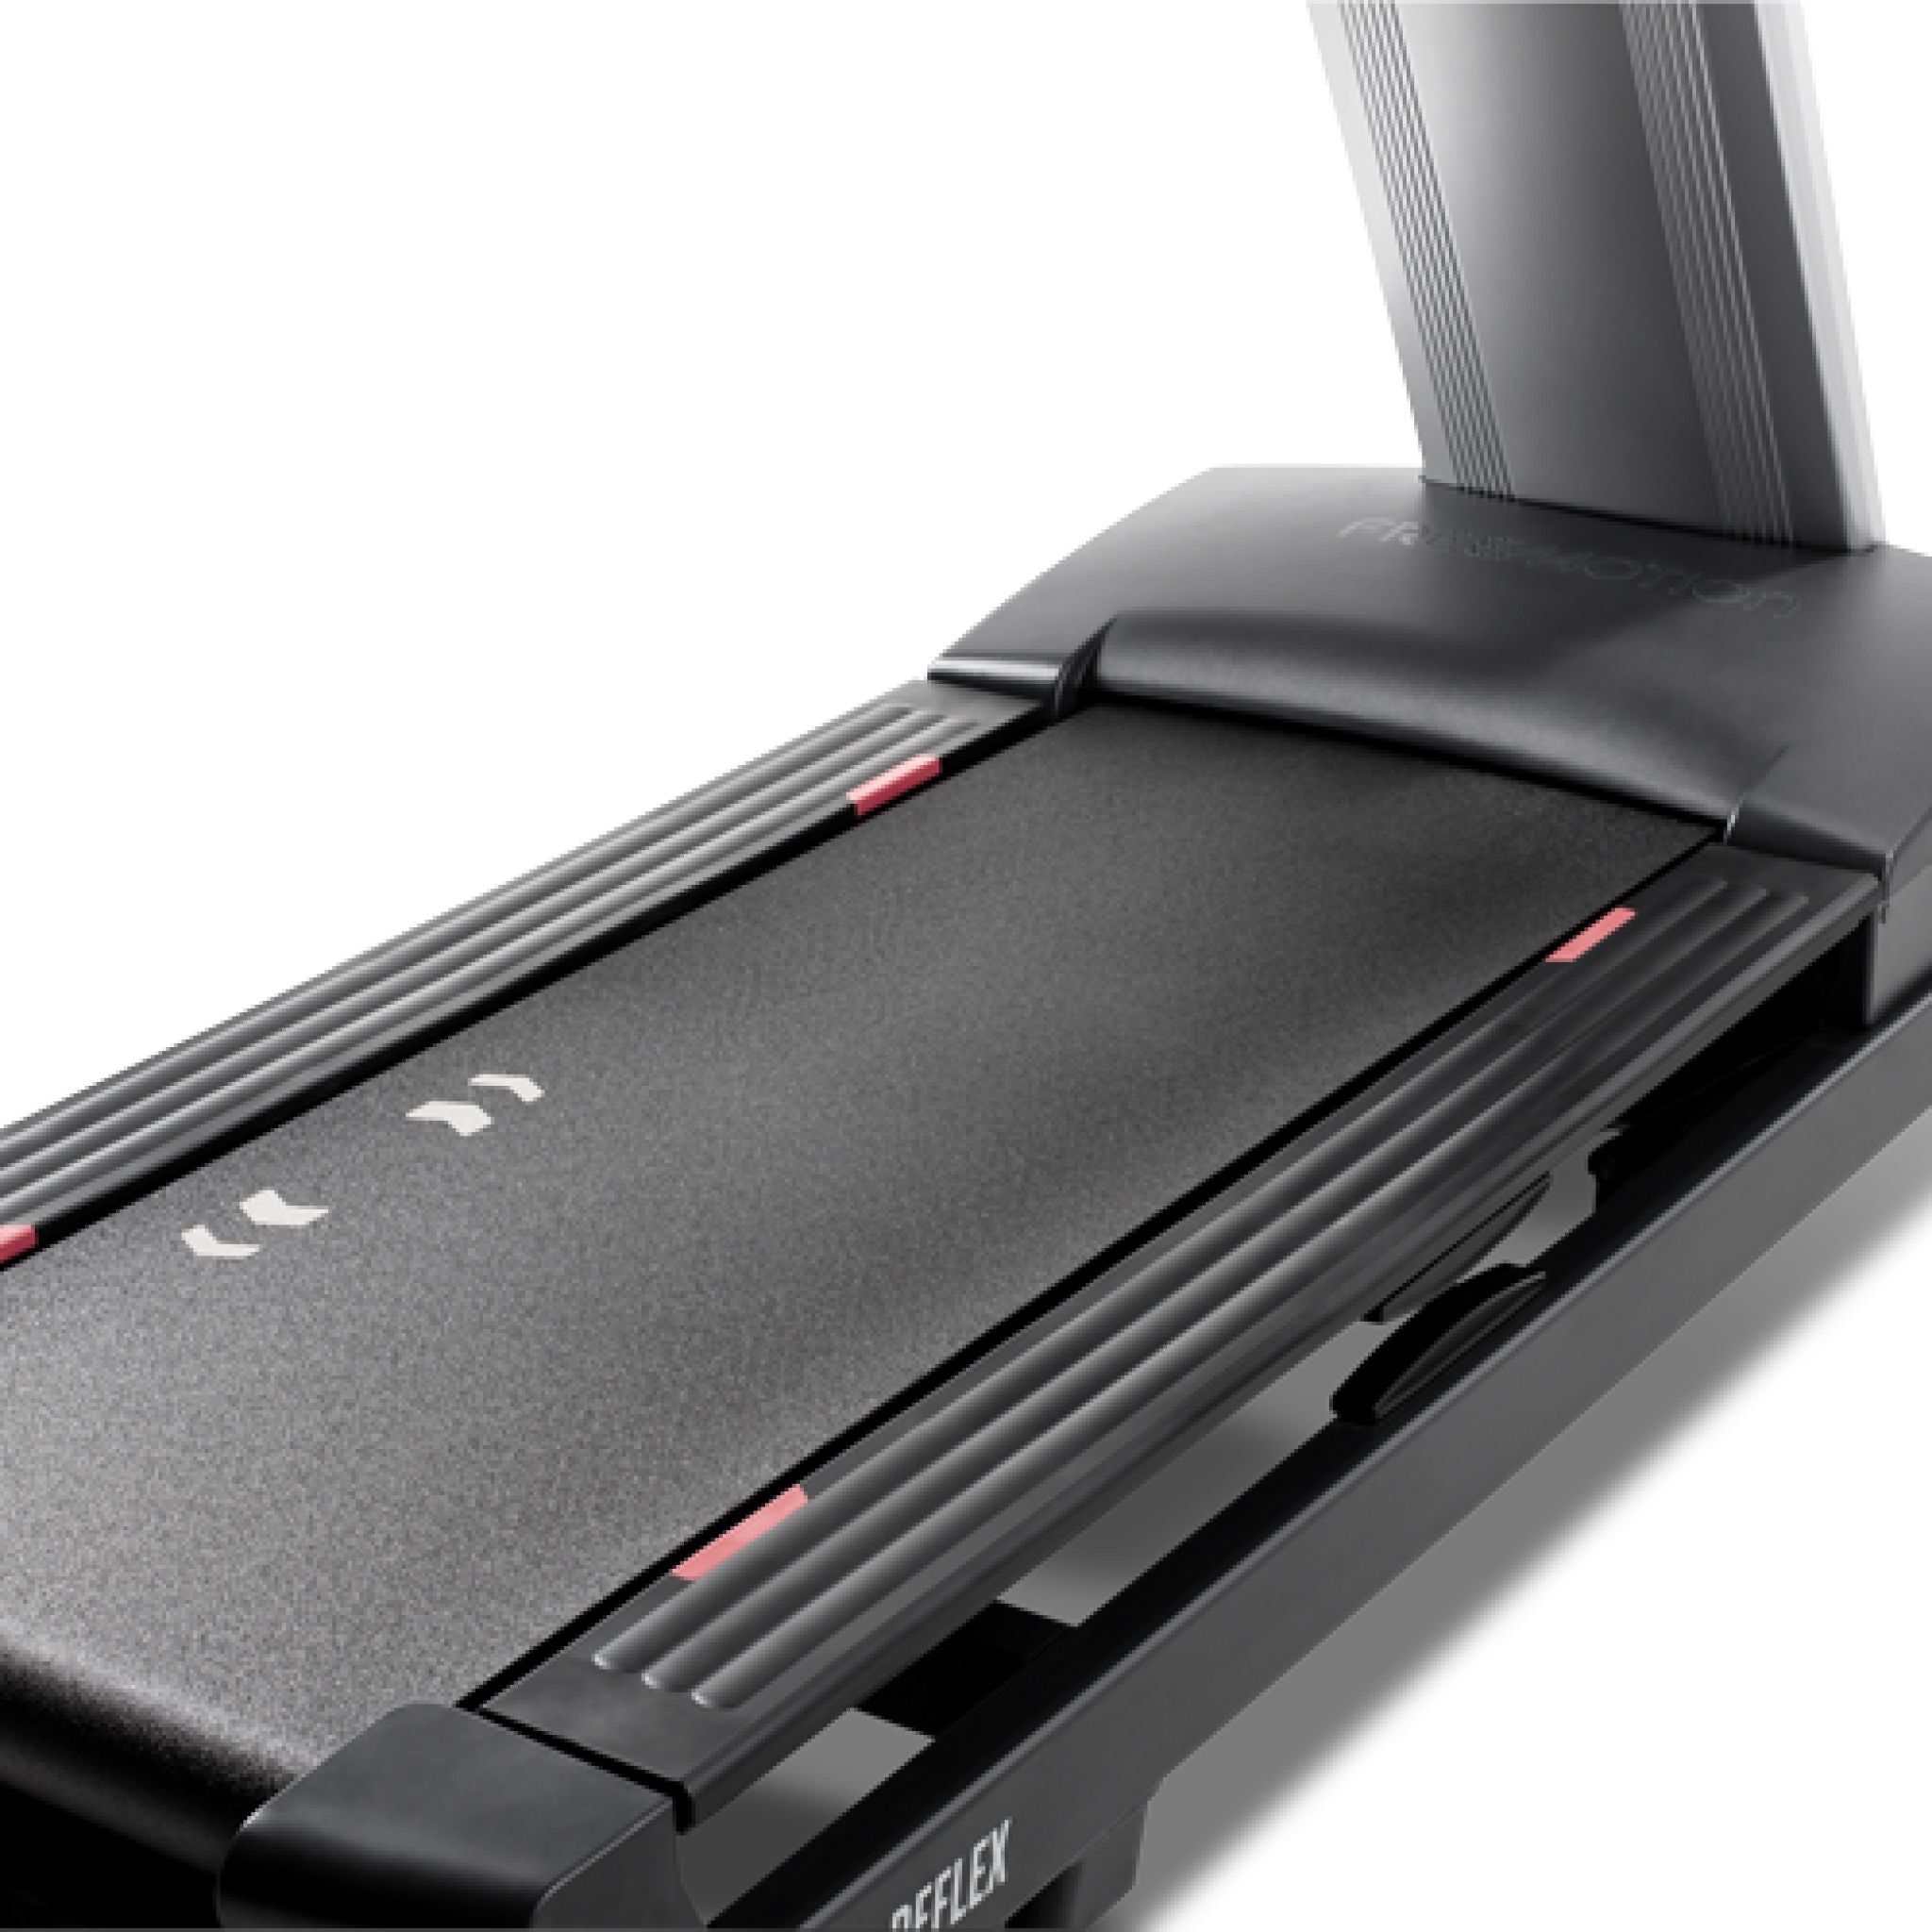 The deck on the Freemotion Interval Reflex 10.7 Treadmill